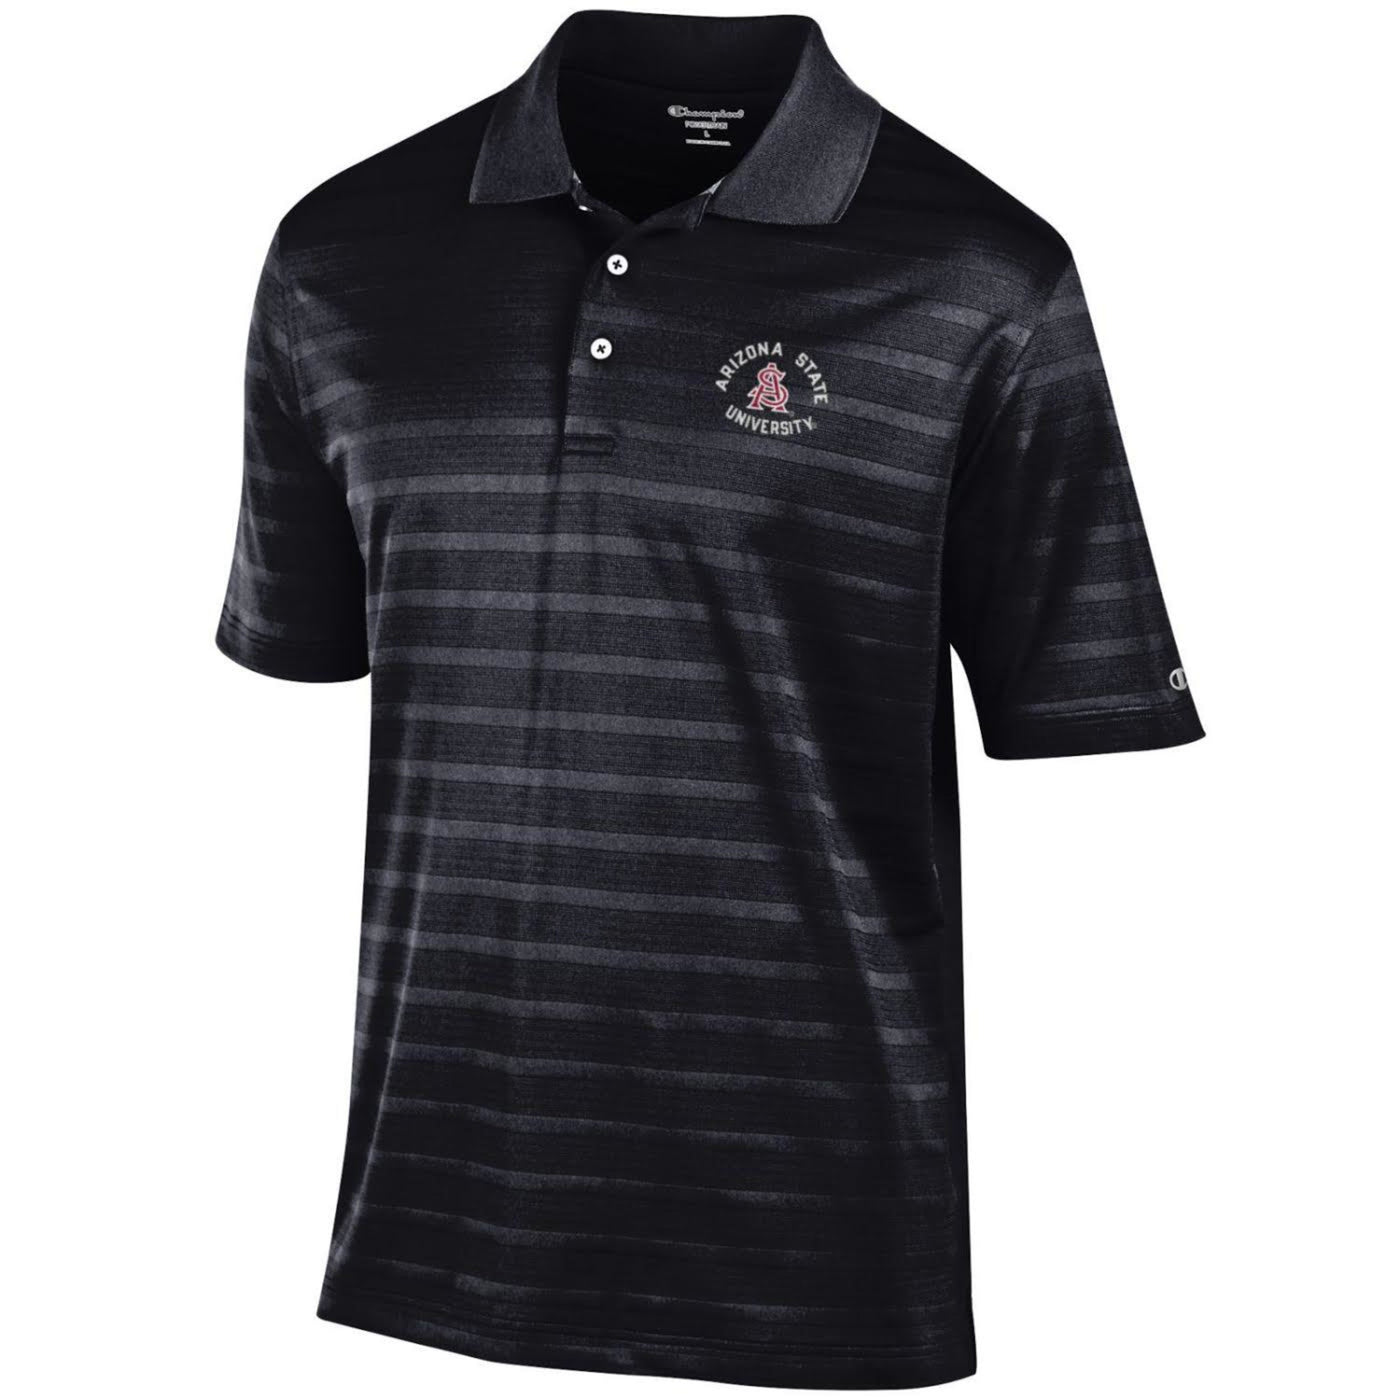 ASU black mens polo with tactile stripes. Interlocking A&S logo on the chest with the text 